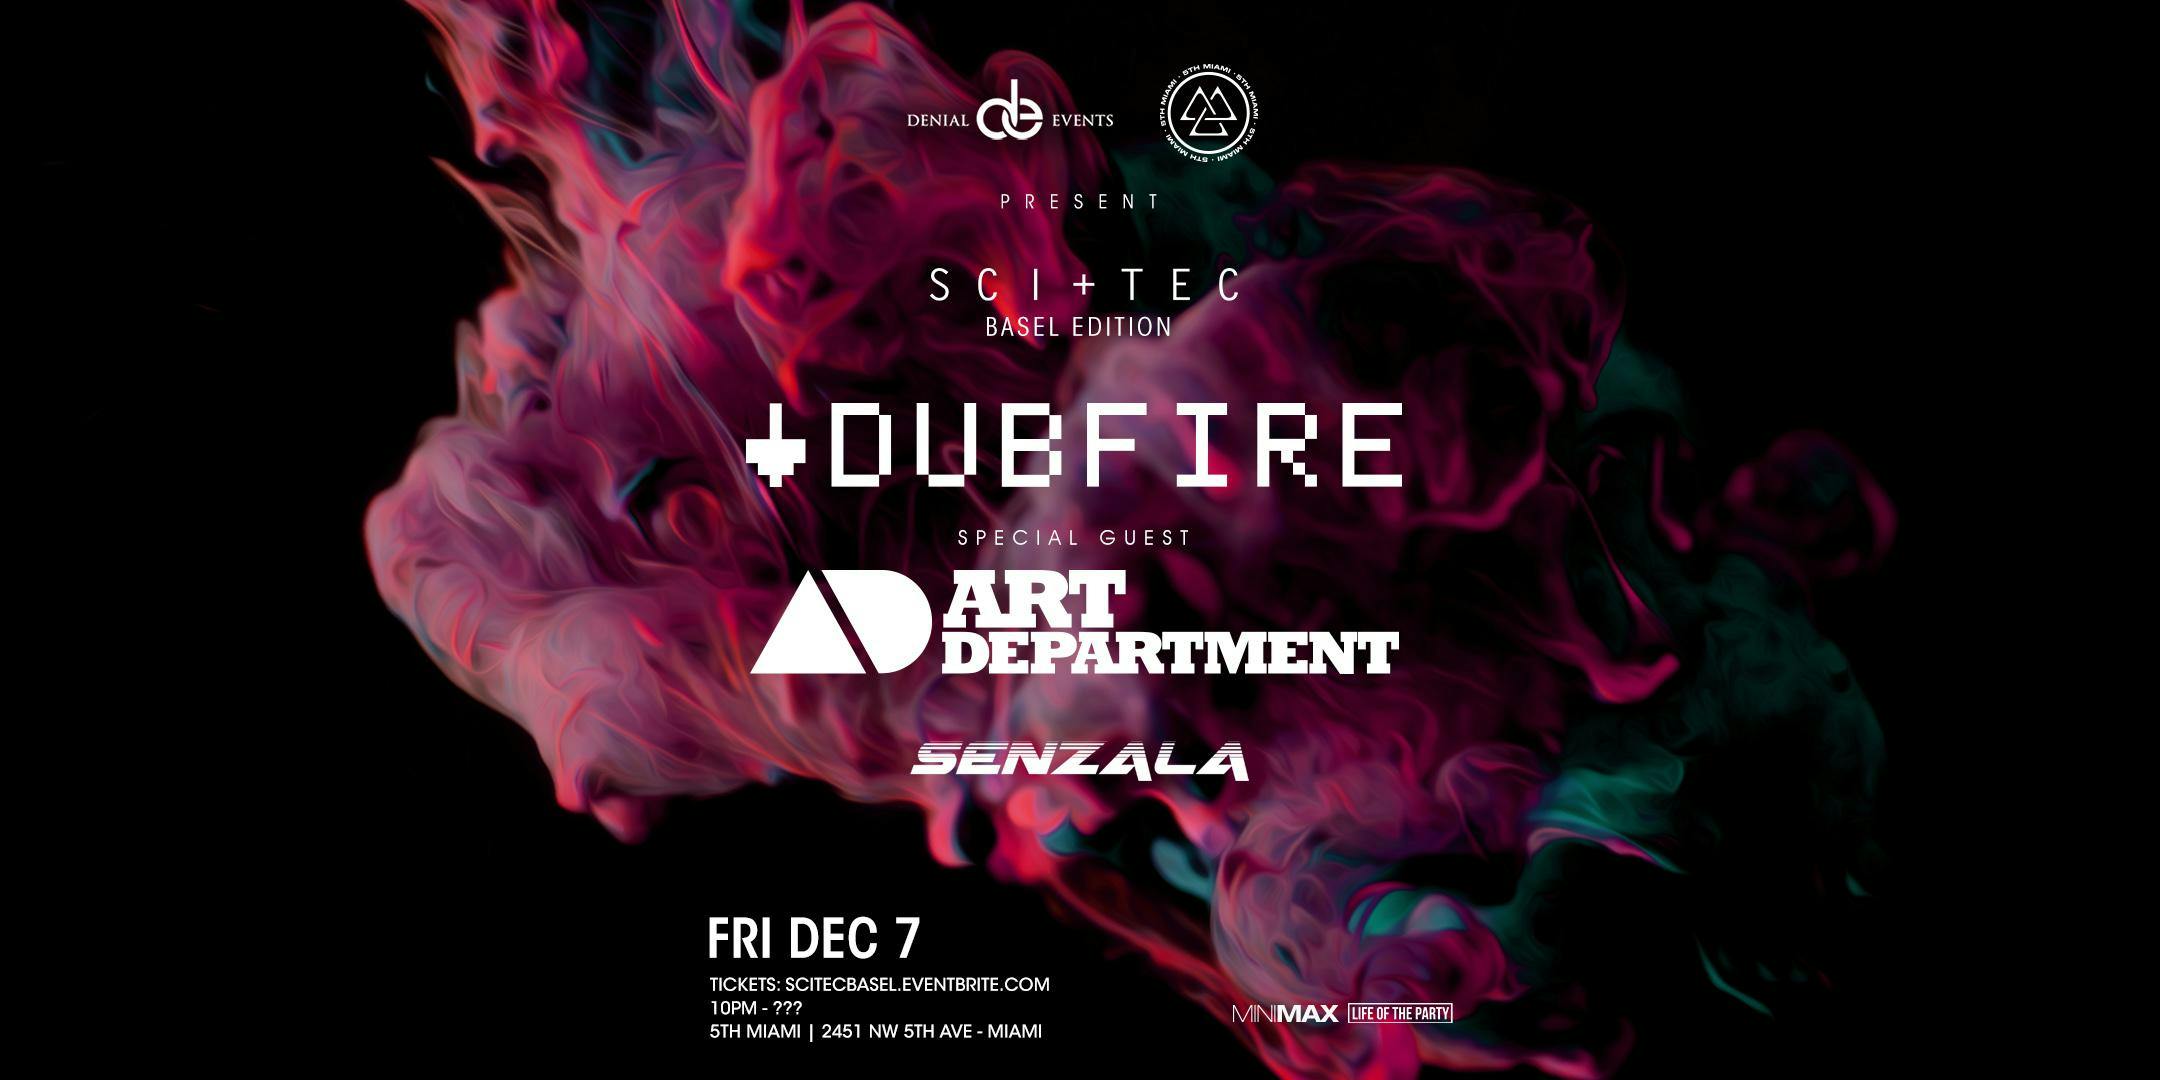 SCI+TEC with DUBFIRE & ART DEPARTMENT 